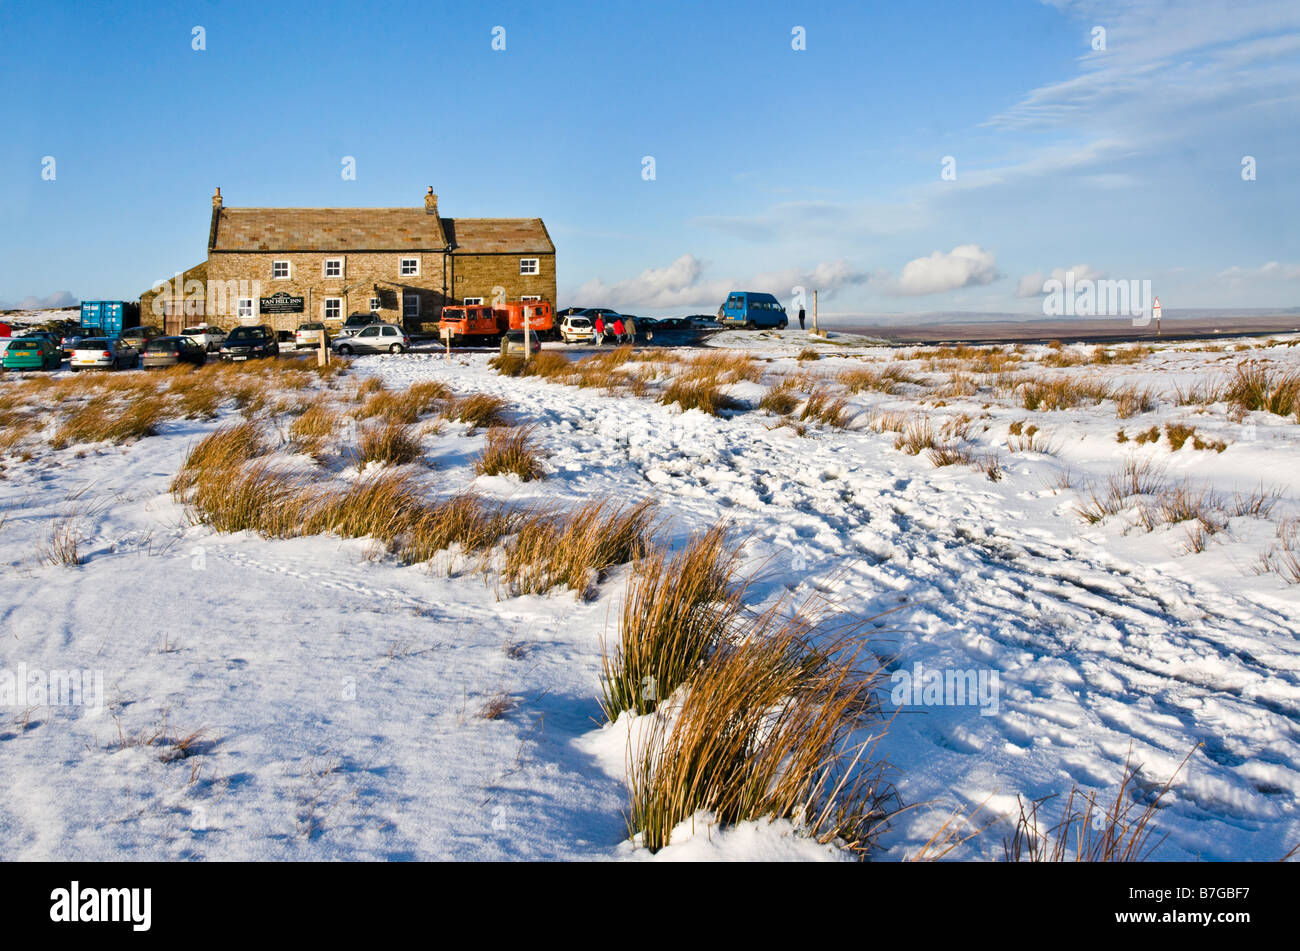 Tan Hill Inn in the Yorkshire Dales, photographed from the Pennine Way National Trail. Stock Photo